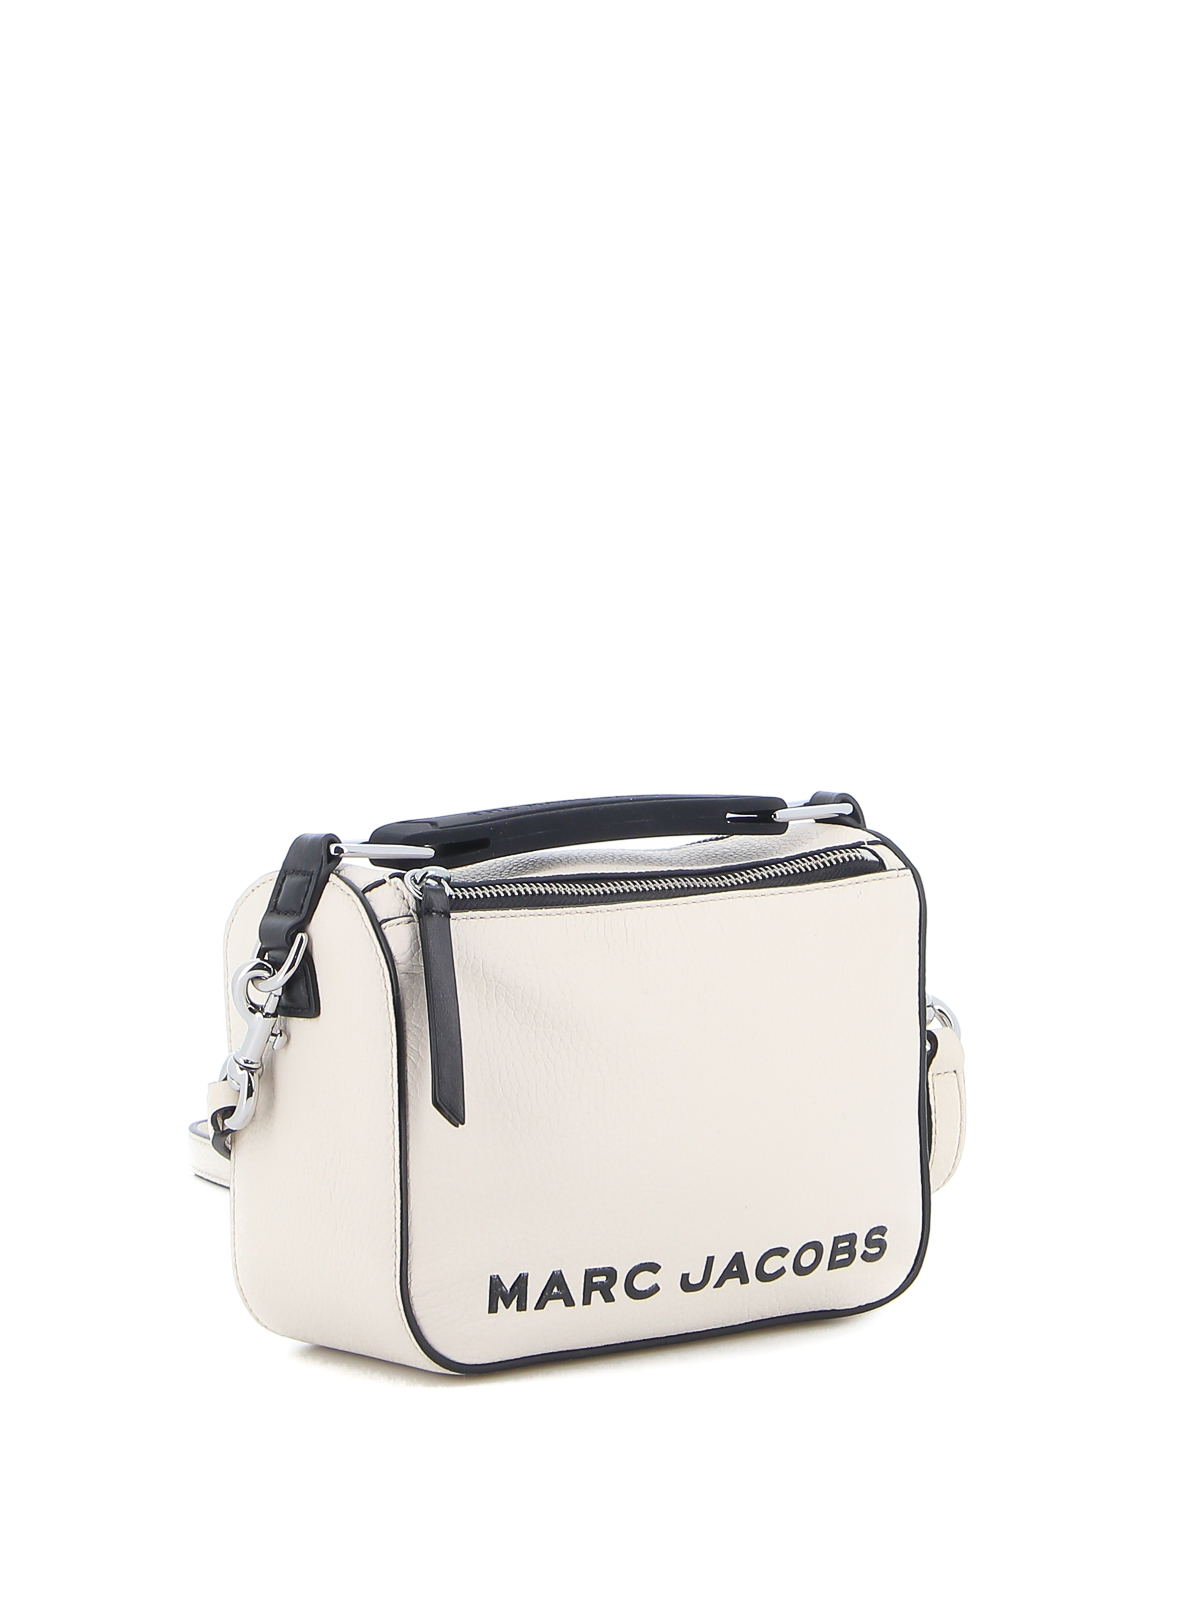 MARC JACOBS the box 20